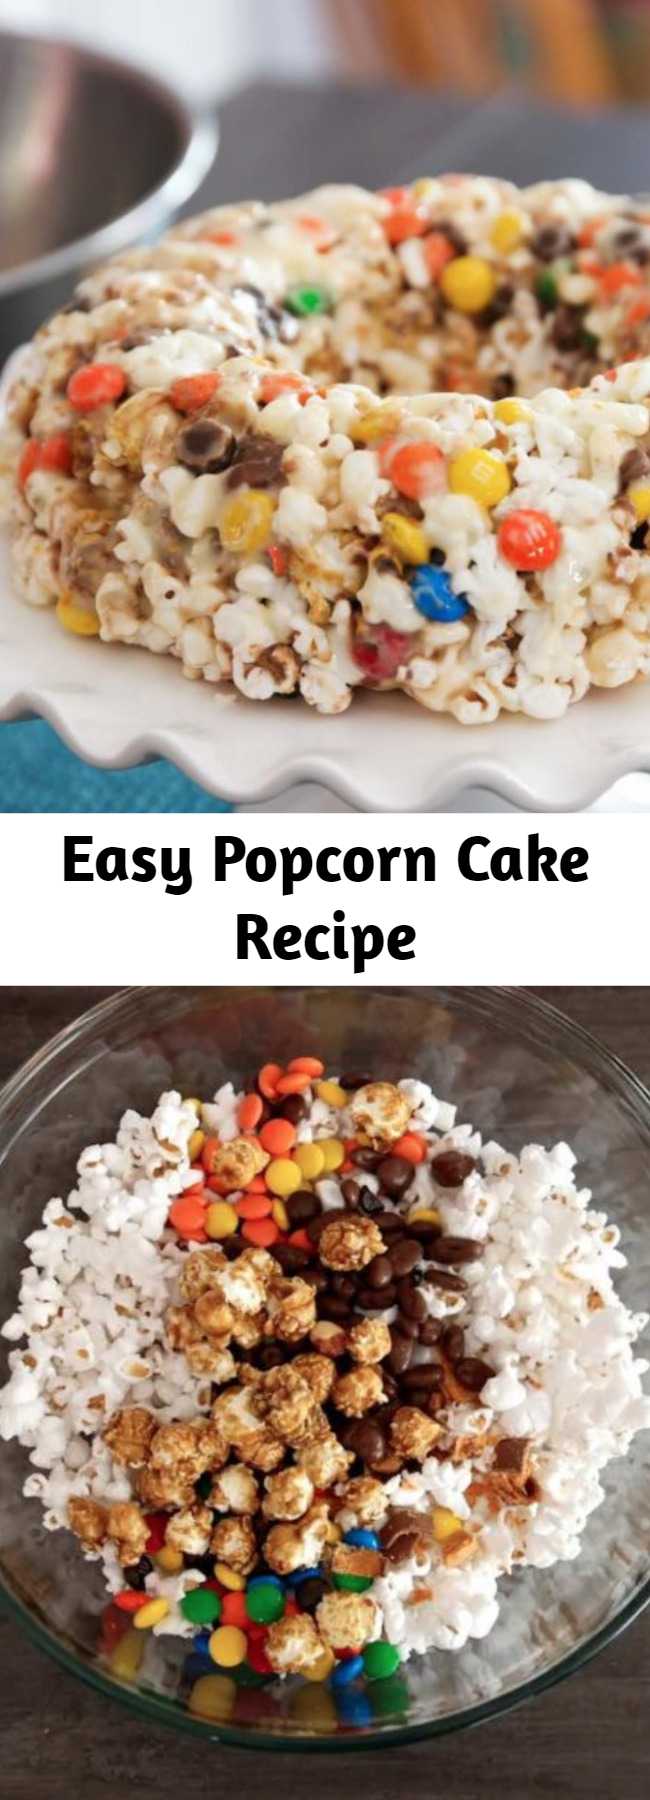 Easy Popcorn Cake Recipe - Popcorn Cake has all the flavors you love - popcorn, candy, marshmallows - made into an easy no-bake dessert in a bundt pan! It's a family favorite that's crunchy, chewy and sweet - perfect for parties, movie nights, weekend treats and any festive occasion.